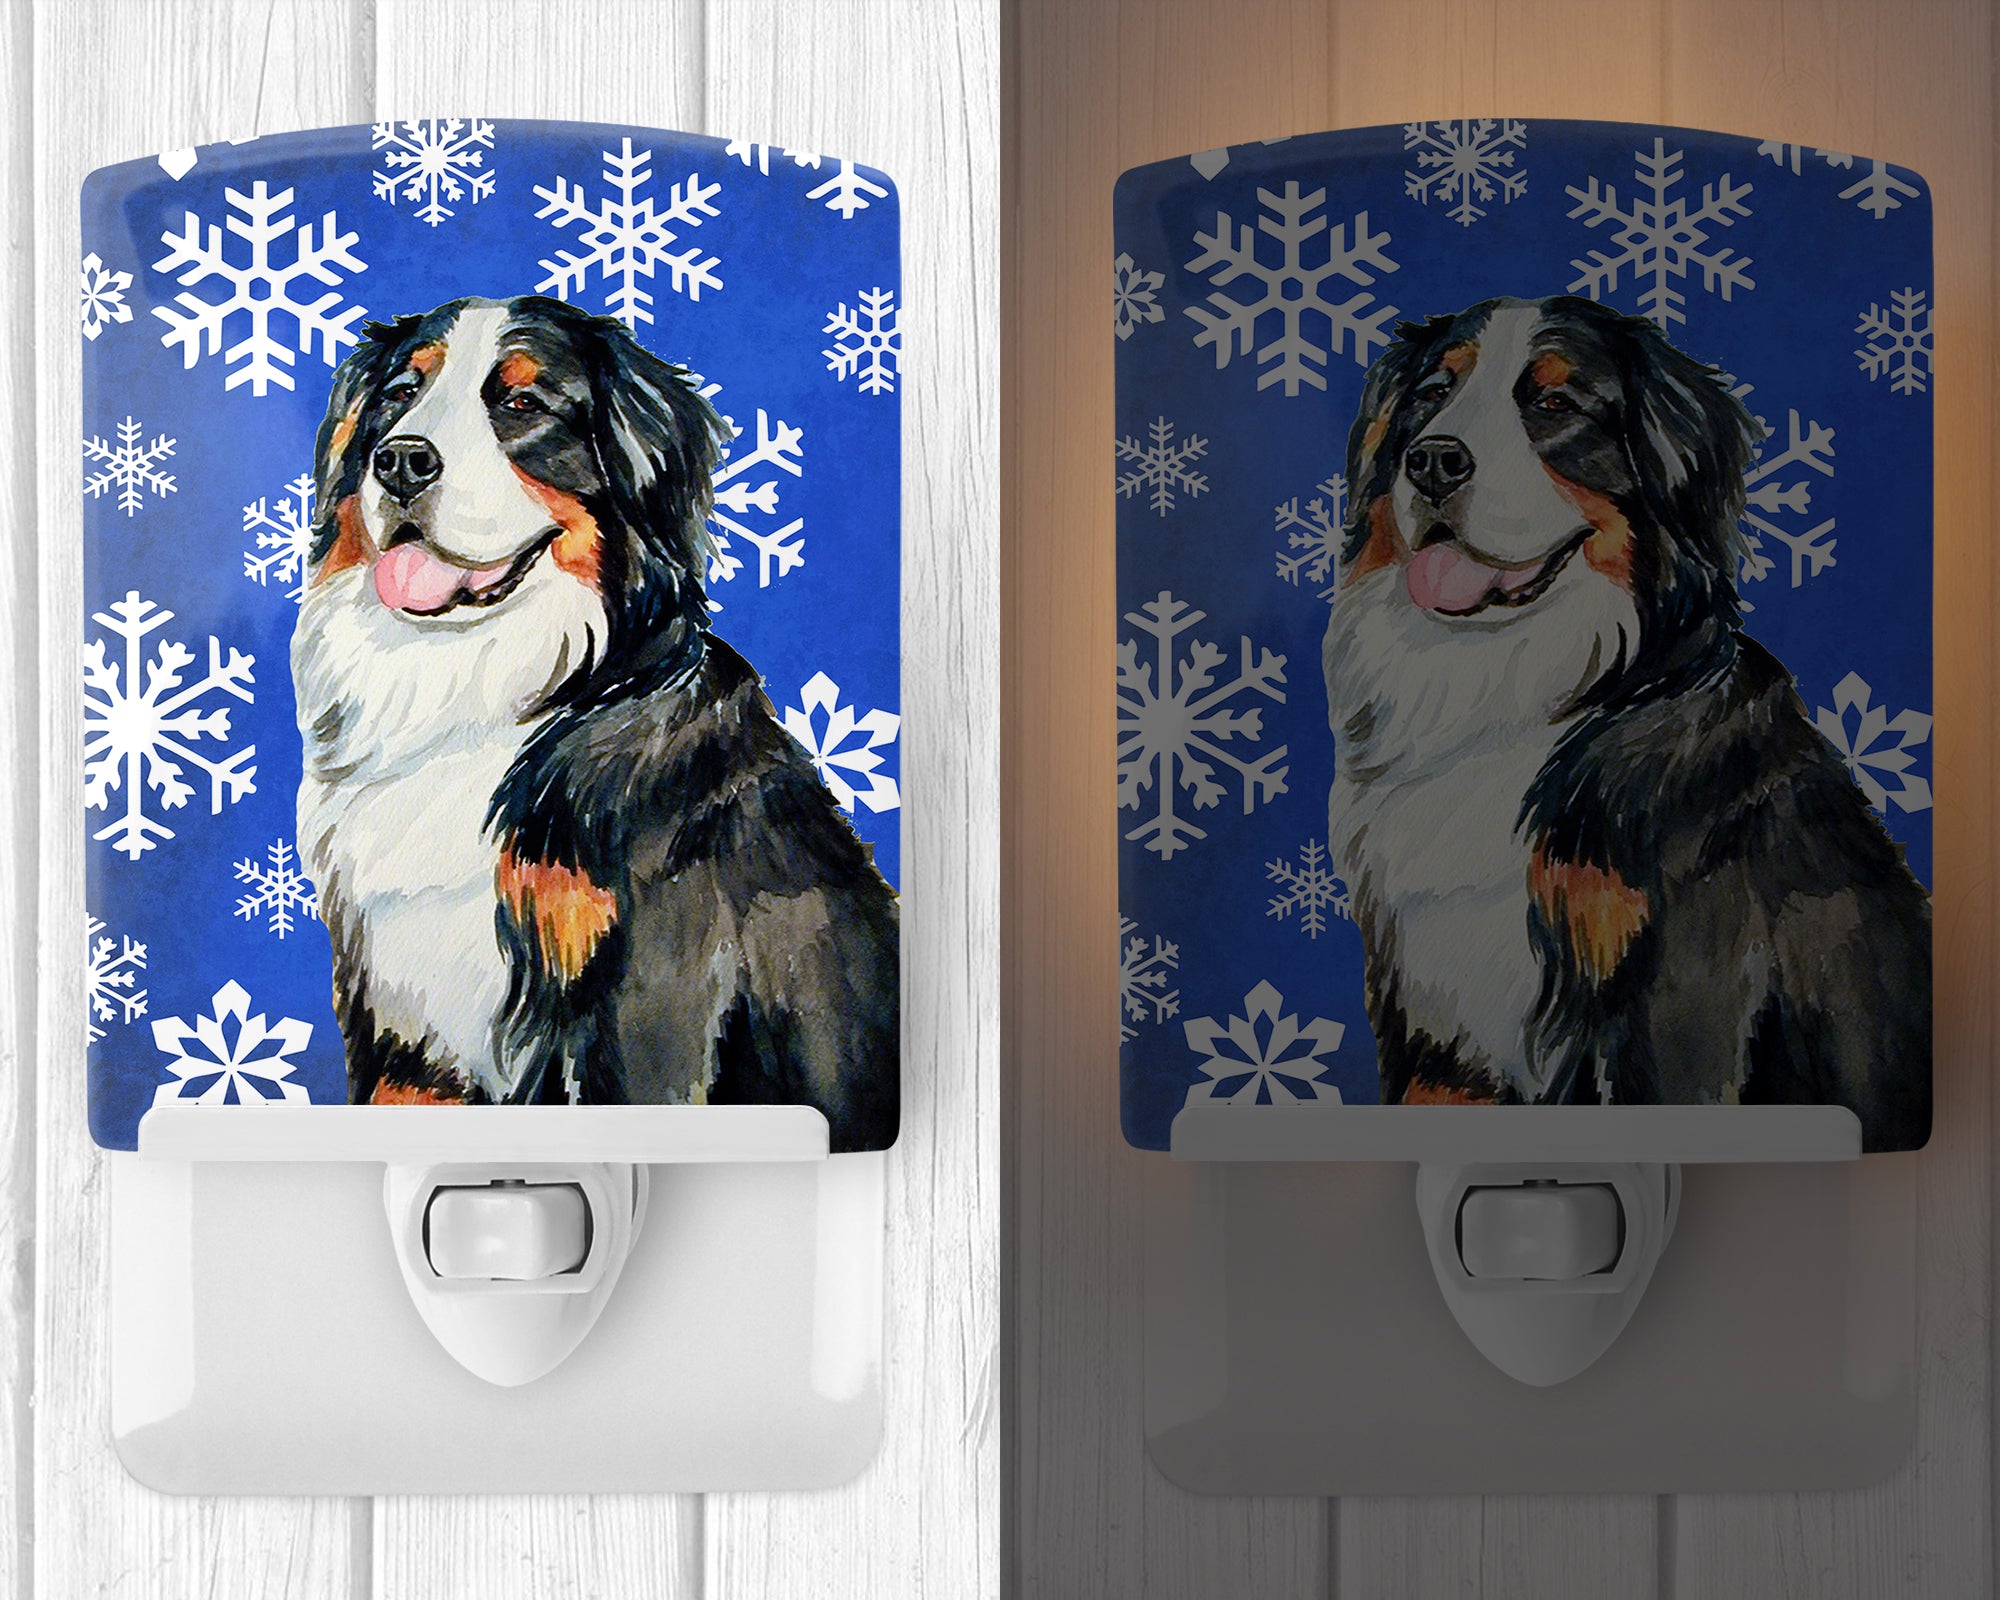 Bernese Mountain Dog Winter Snowflakes Holiday Ceramic Night Light LH9289CNL - the-store.com